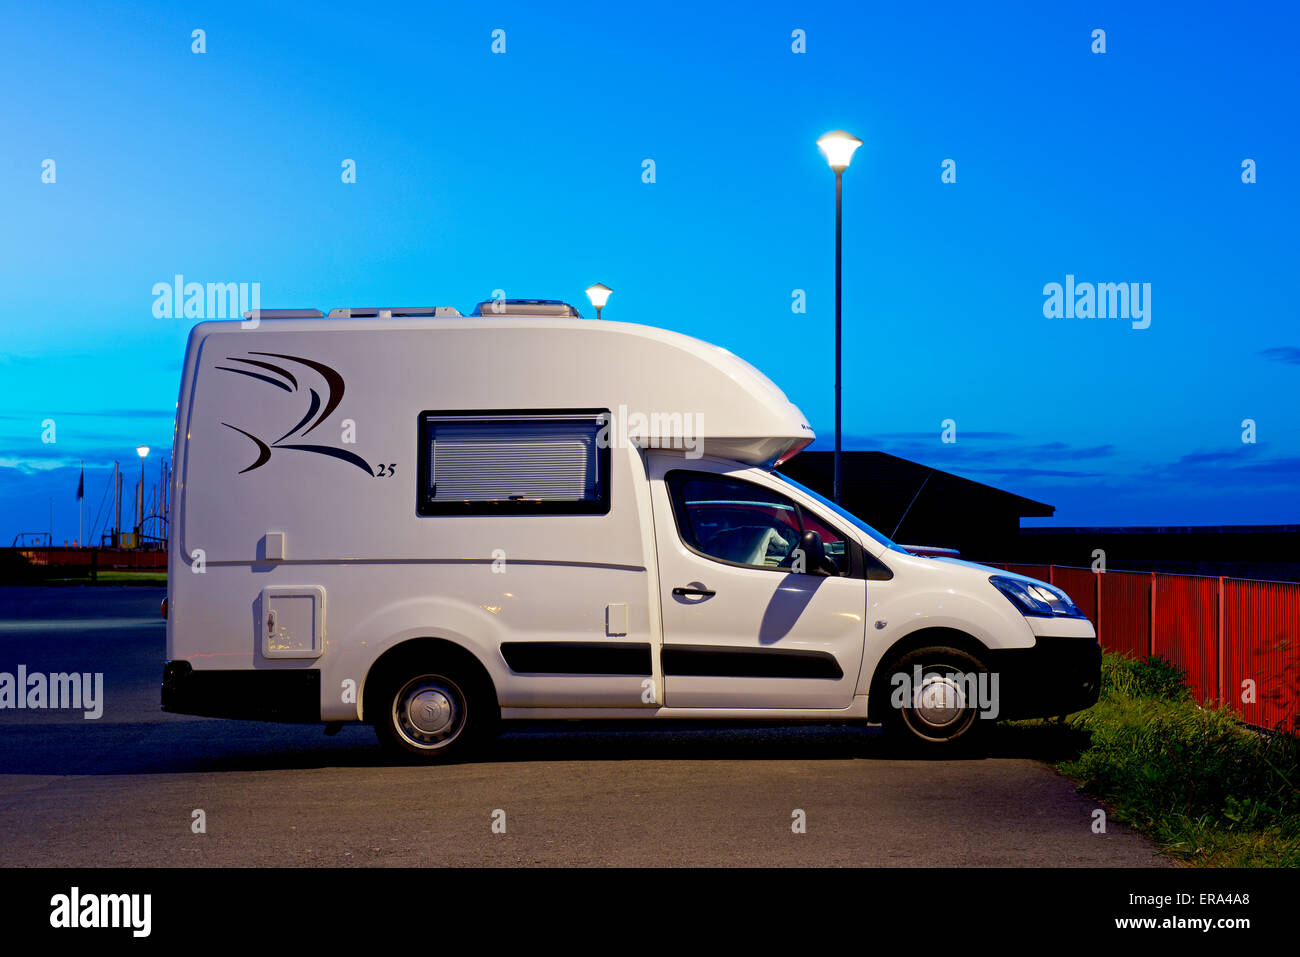 Romahome 25, small motorhome, in car park at night Stock Photo